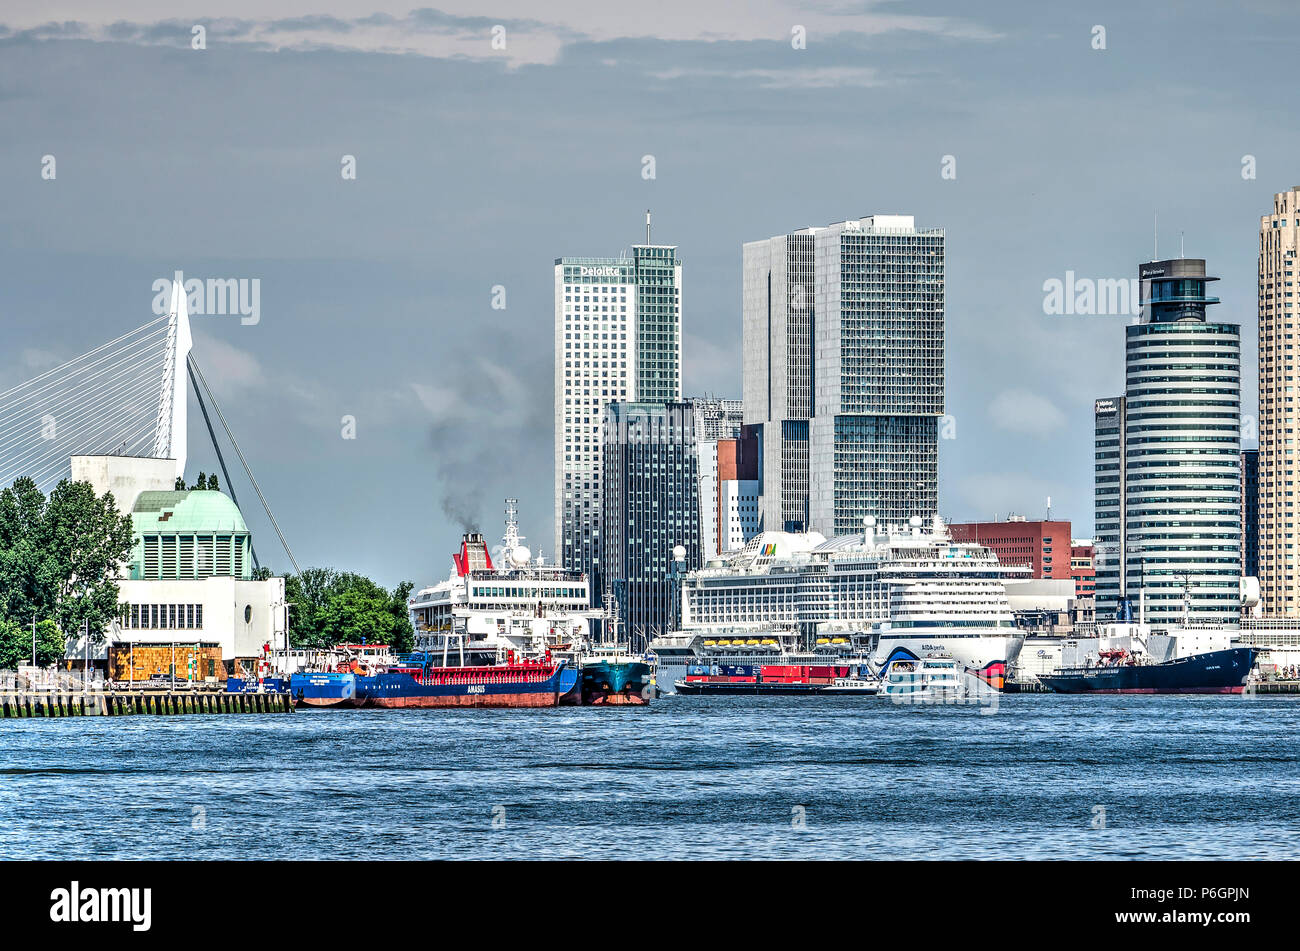 Rotterdam, The Netherlands, May 31, 2018: Cruiseships, cargo vessels and a tourist boat on the Nieuwe Maas river between downtown and the southbank Stock Photo